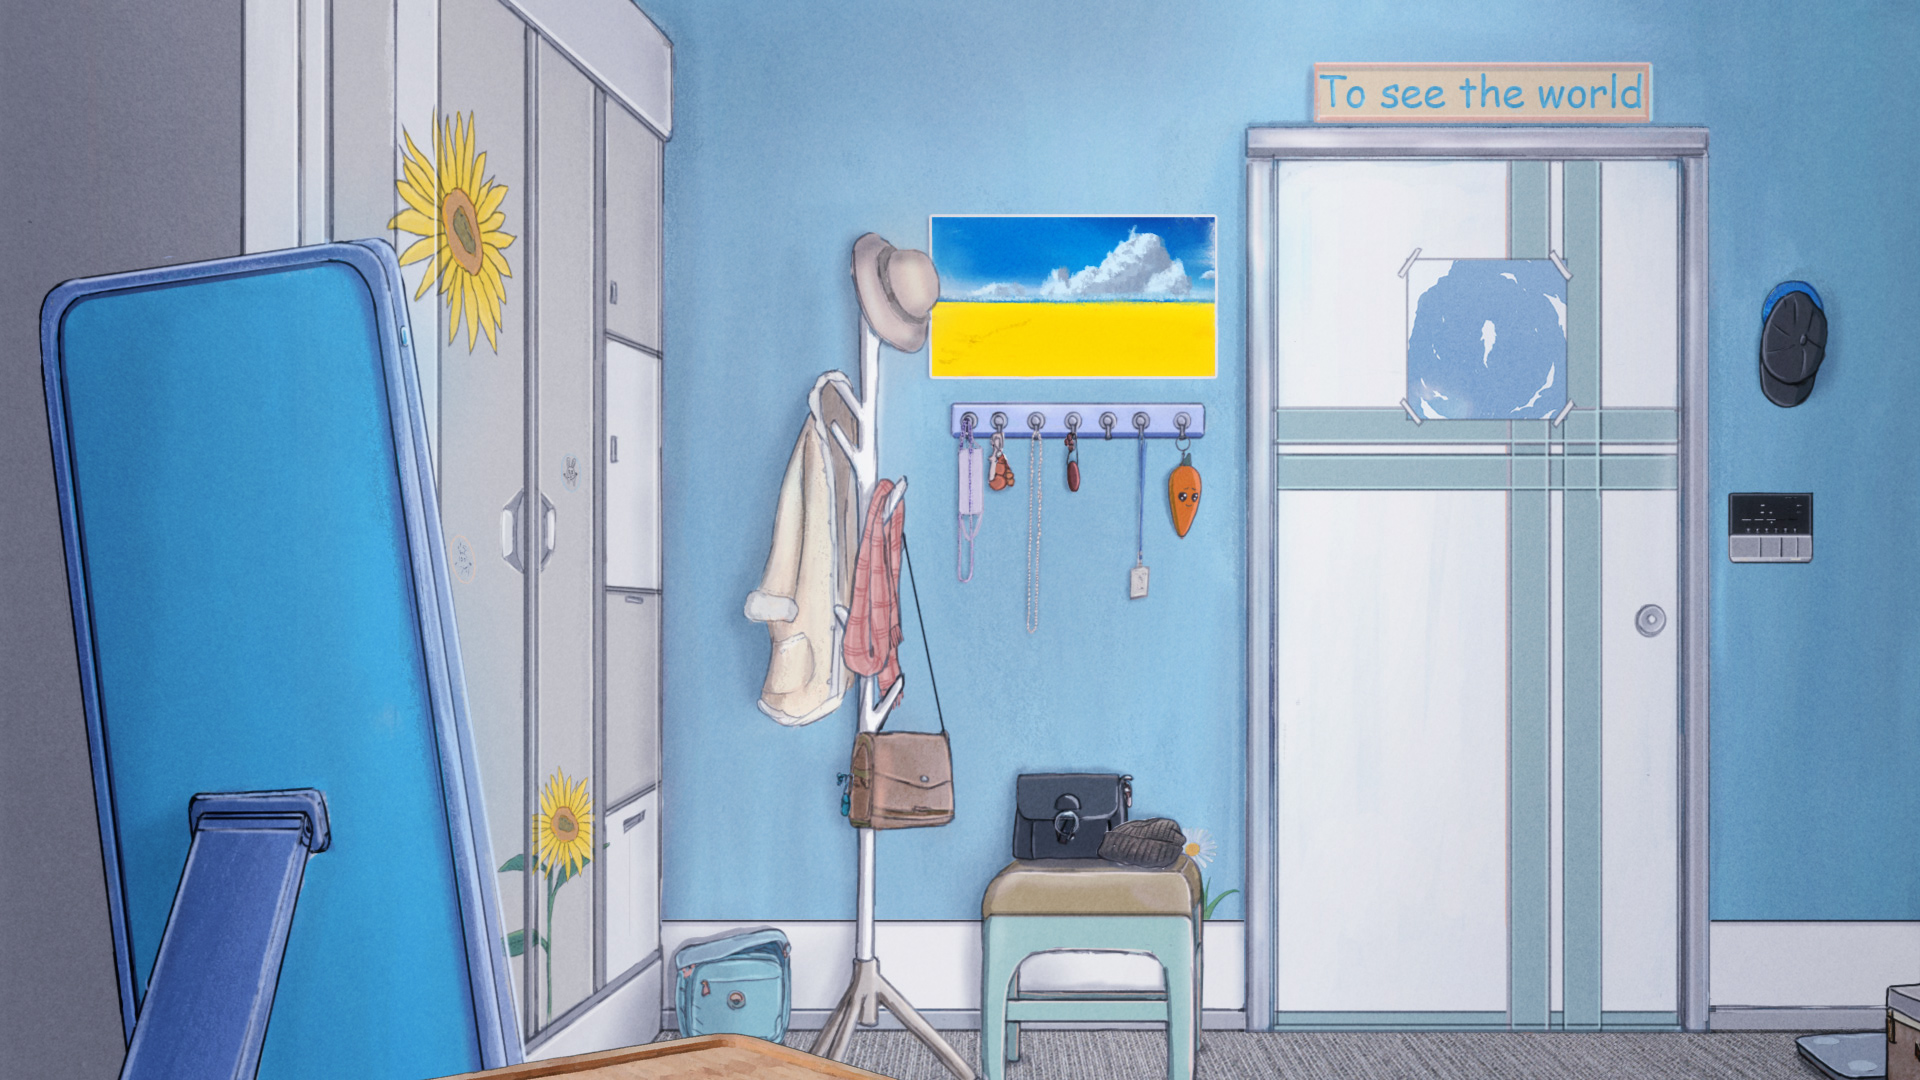 Digital Art Anime Winter Room Living Rooms Sunflowers Picture In Picture Wardrobe 1920x1080